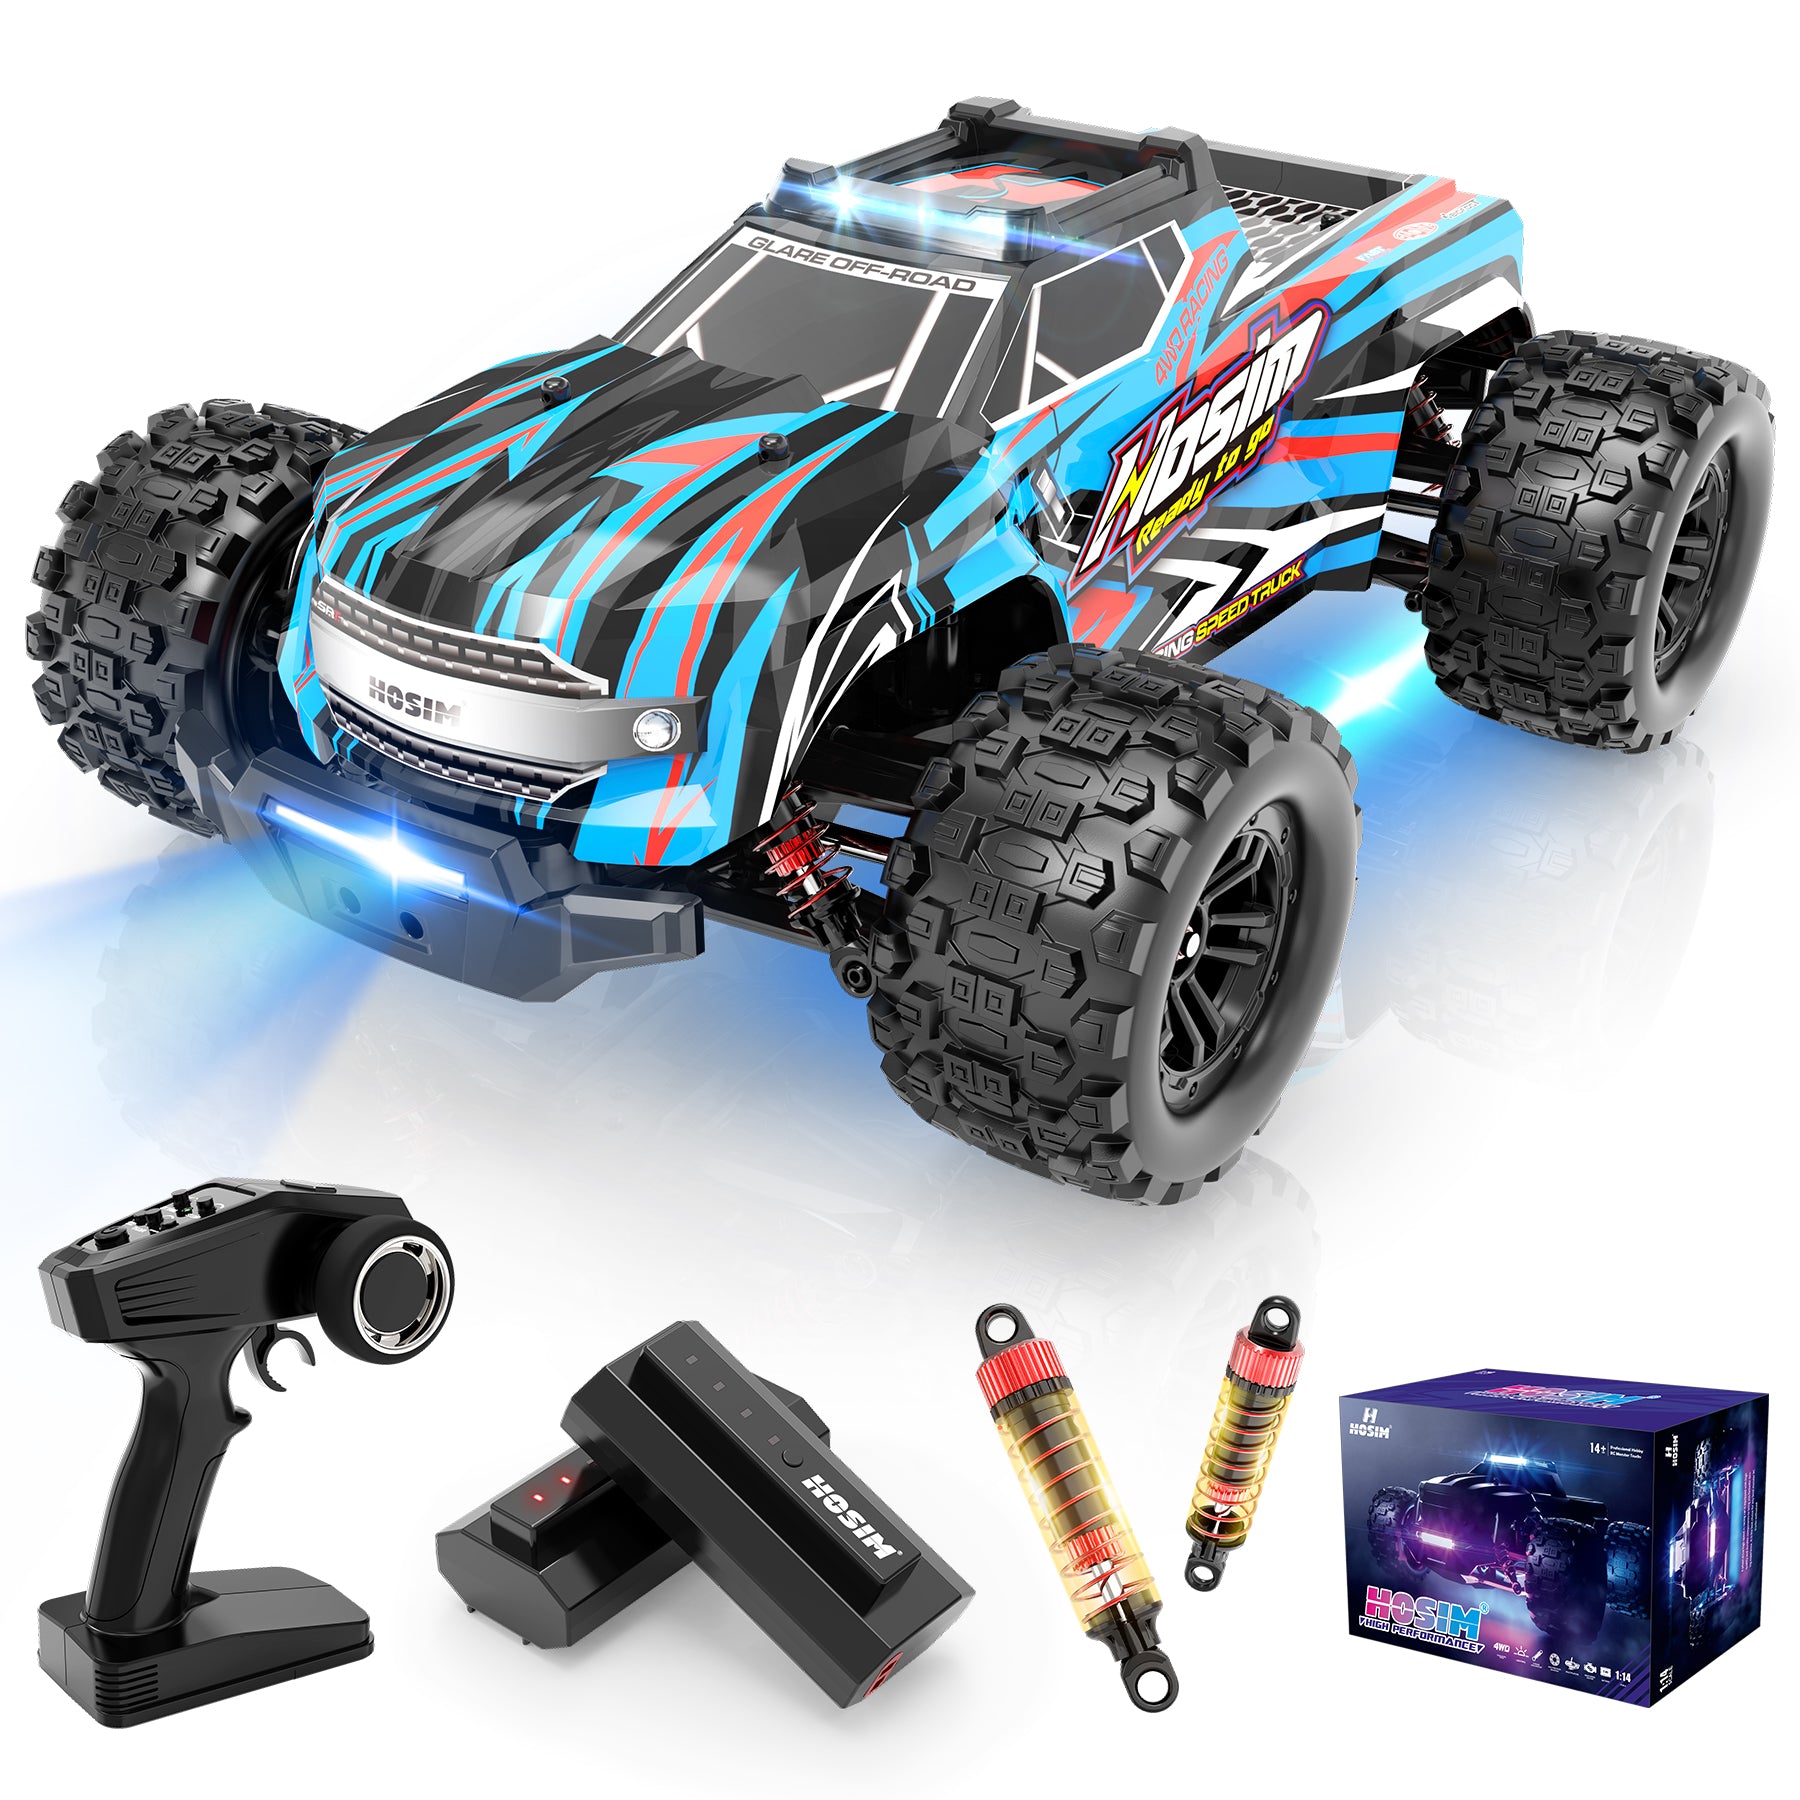 Hosim 1:14 RC Car Monster Truck with Lights Remote Control Racing Car 4WD Drift High Speed for Adults & Kids